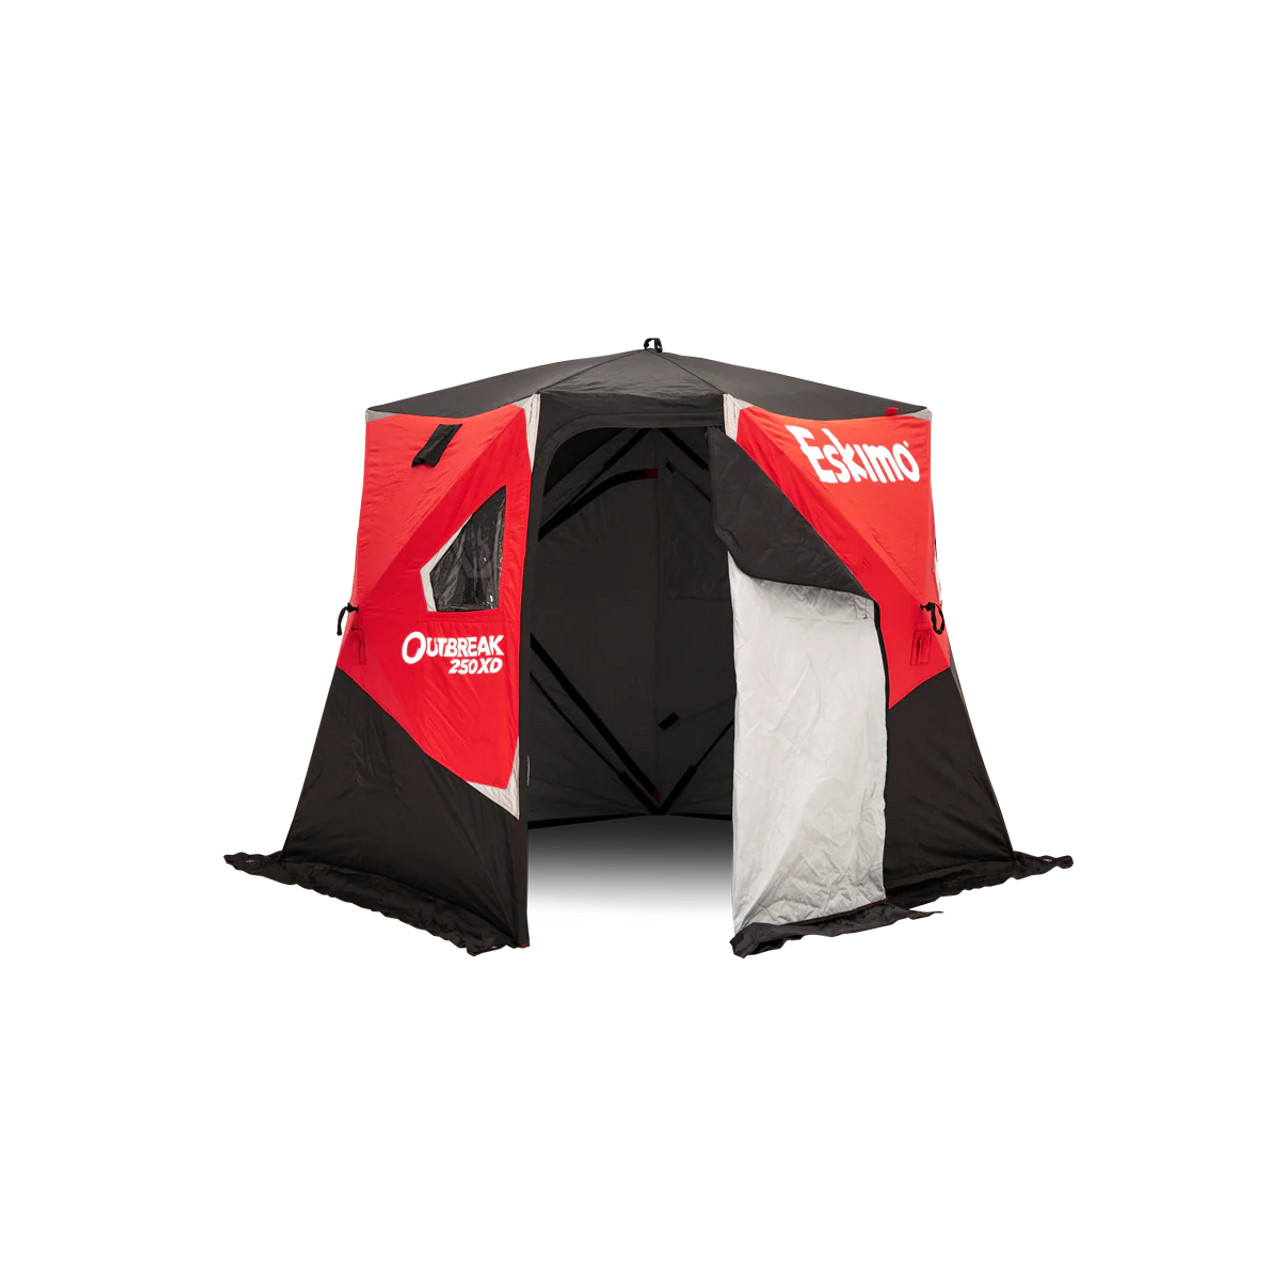 The Eskimo Outbreak 250XD ice fishing shelter keeps anglers warm in 51  square feet of high-loft insulated comfort.